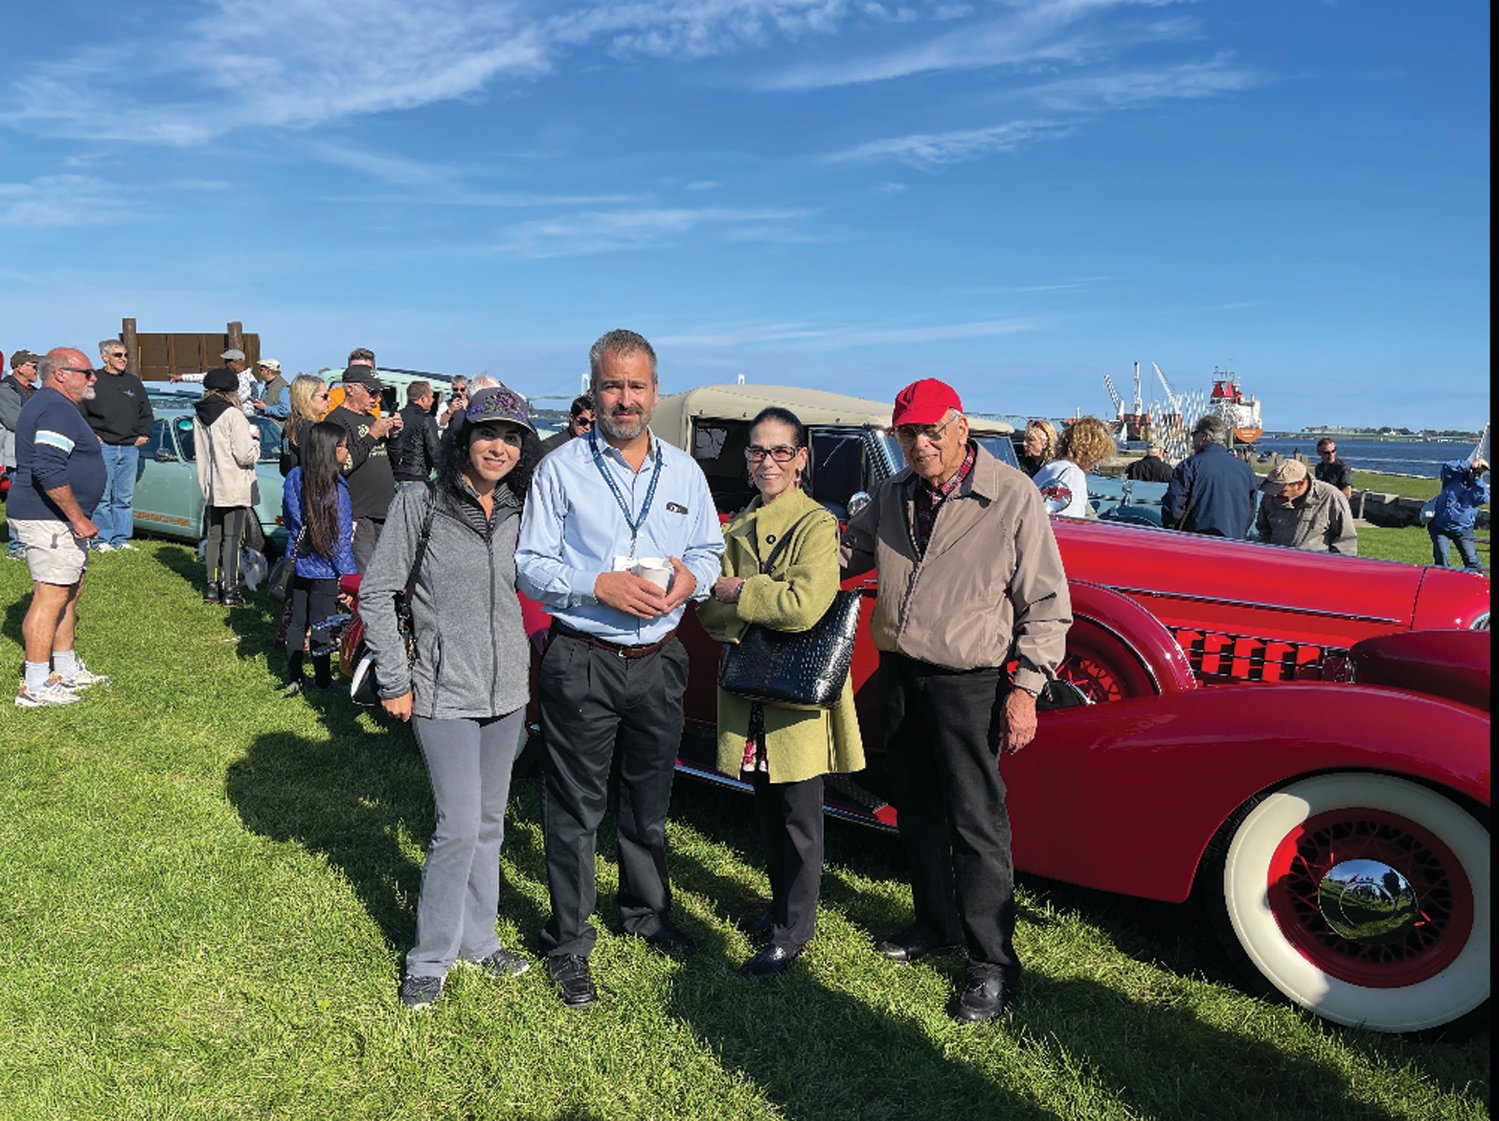 SHOW STOPPER: John Ricci drove his 1934 Cadillac to Fort Adams on Saturday, Oct. 2, where he lined up with other classic automobiles prior to a parade that ended on Bellevue Avenue in Newport. Ricci posed for a photo with his family and the car.